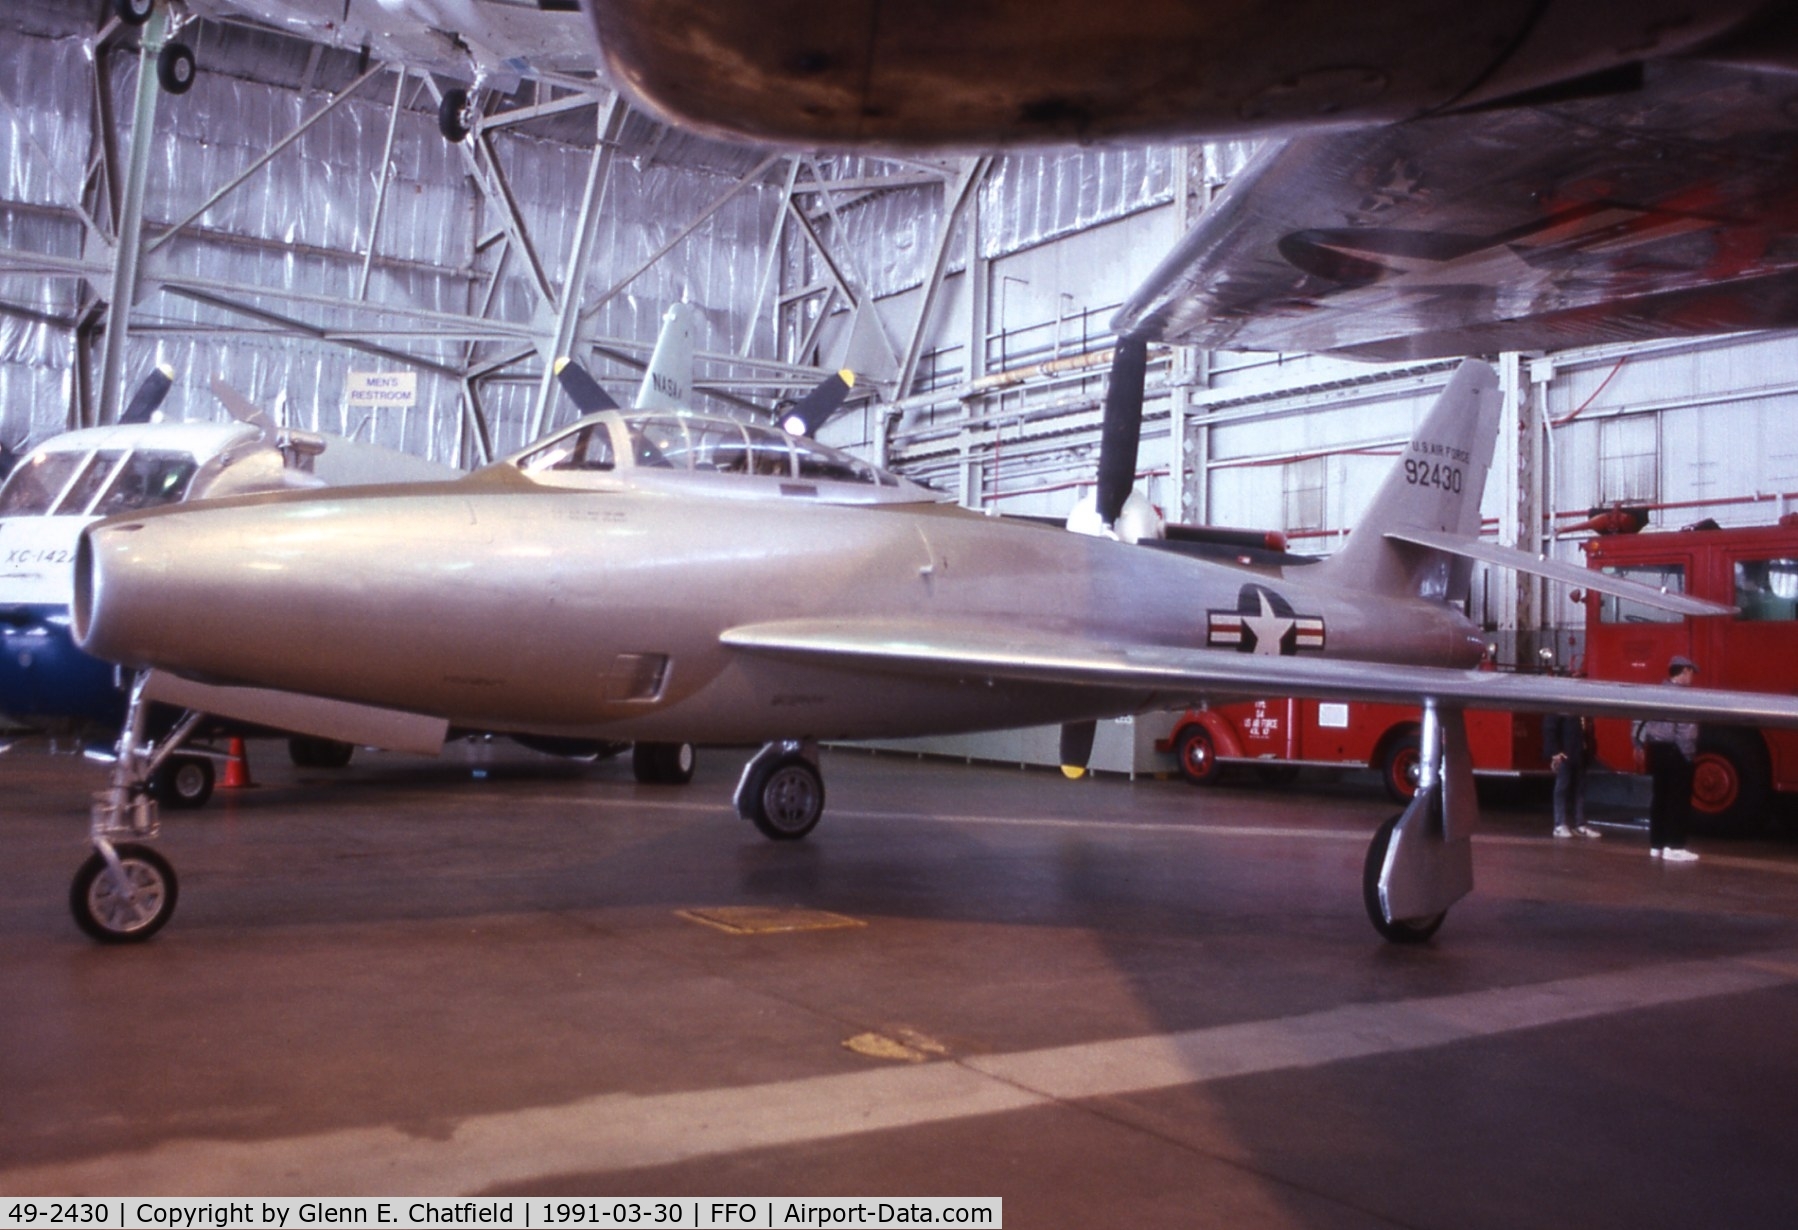 49-2430, 1950 Republic YRF-84F FICON C/N Not found 49-2430, YRF-84F at the National Museum of the U.S. Air Force